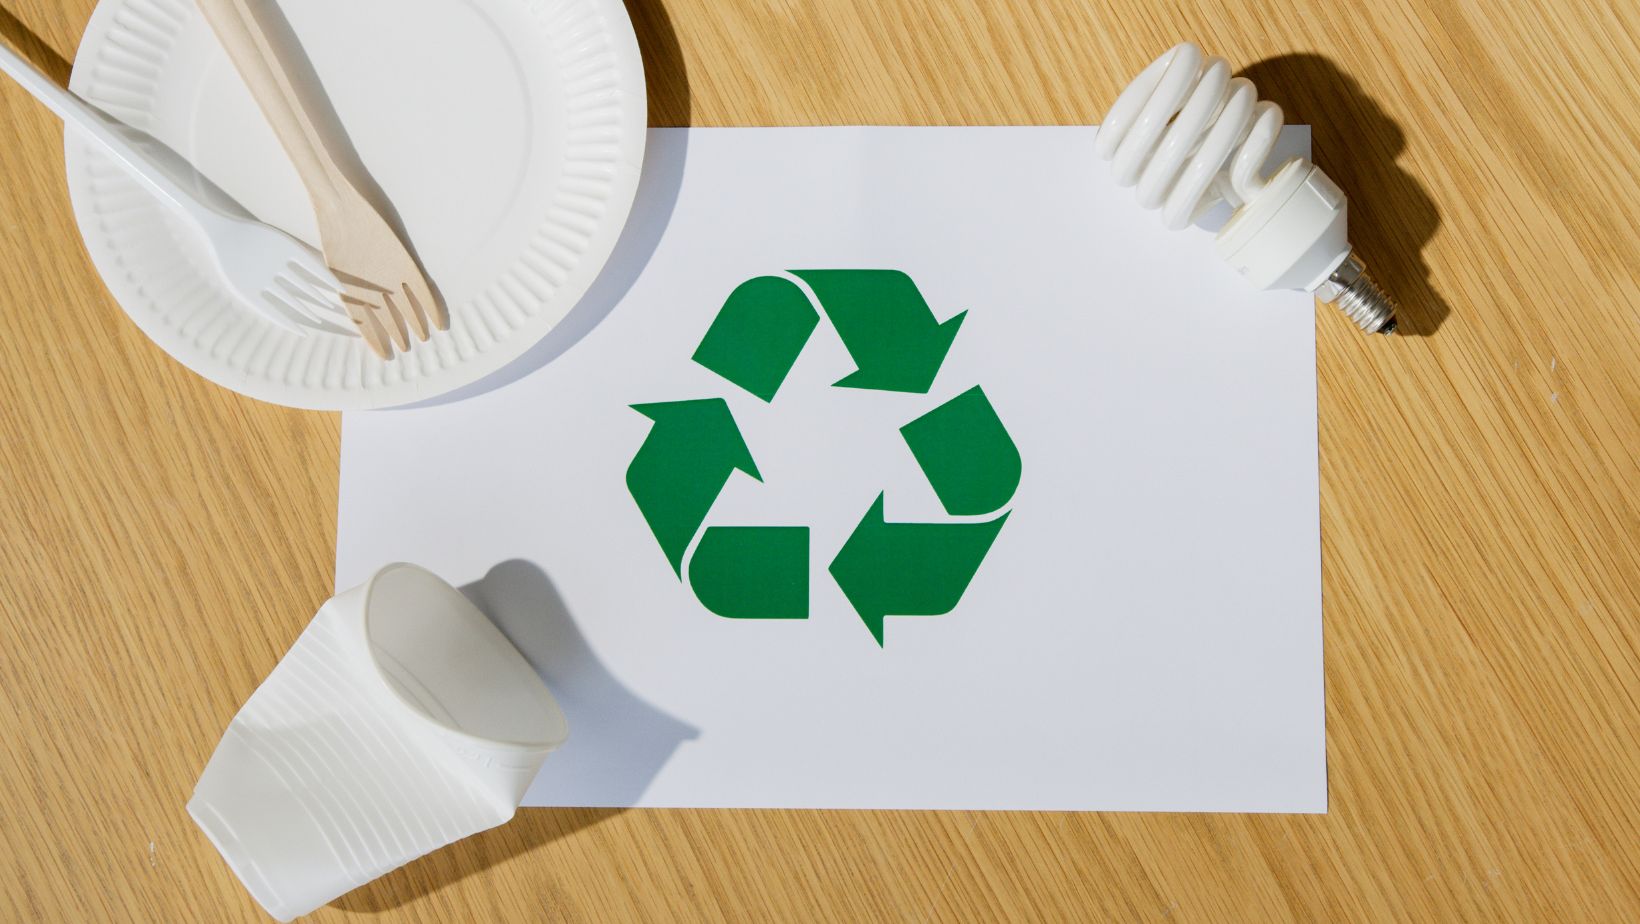 Recycling icon on a piece of paper with recyclable trash around it